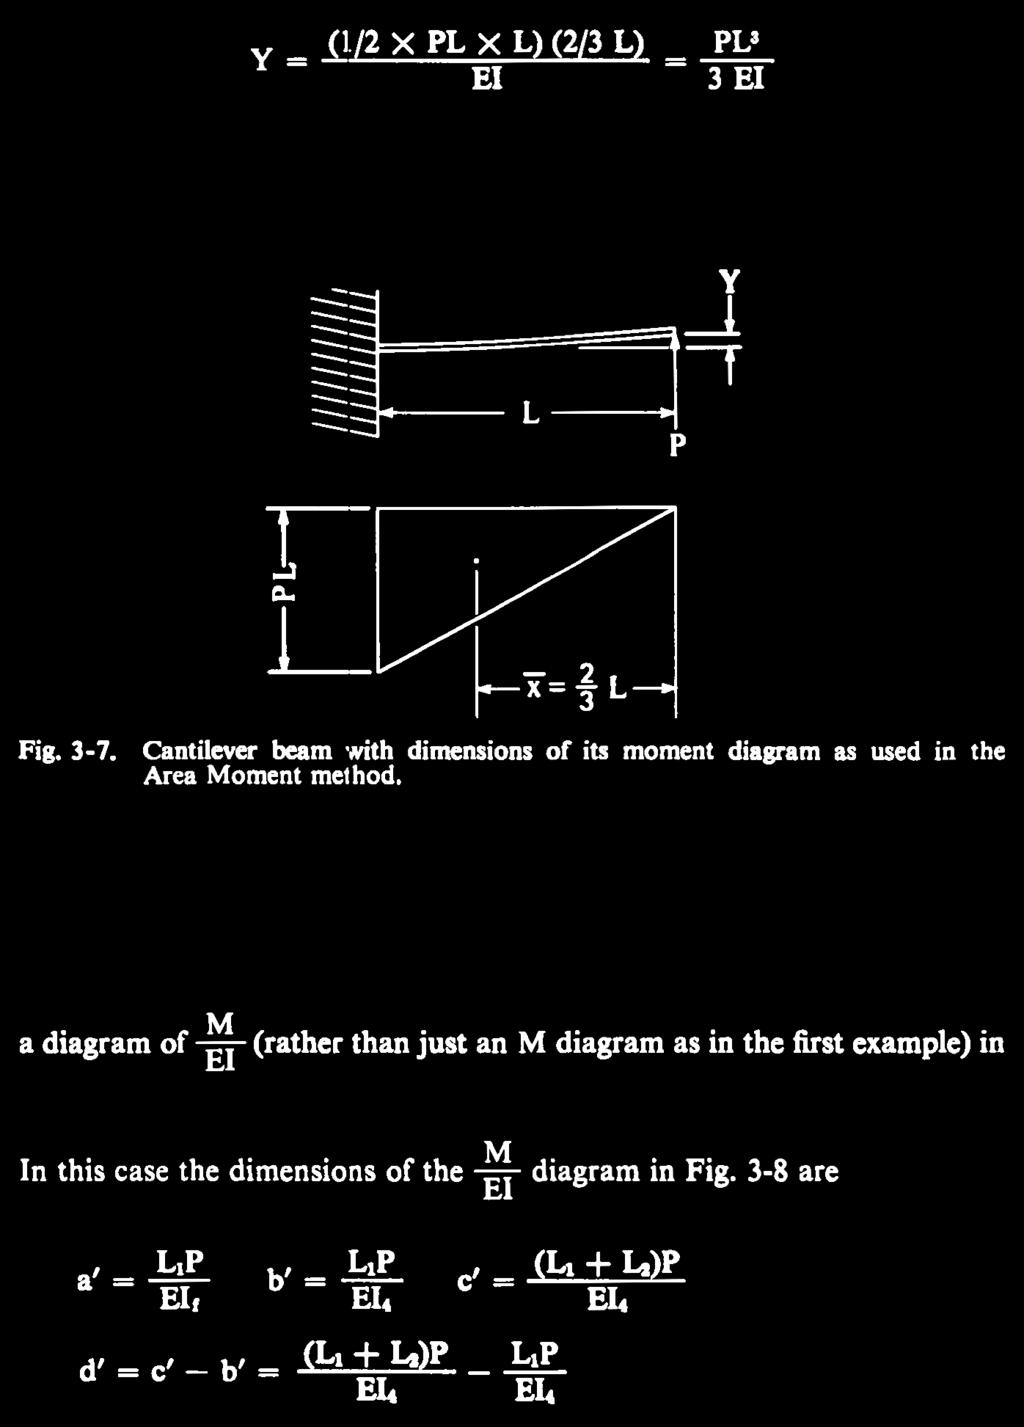 which is the same equation previously stated for simple cantilever beams before the constants were changed so that P could be expressed in grams, i.e., P in the above solution is in pounds.